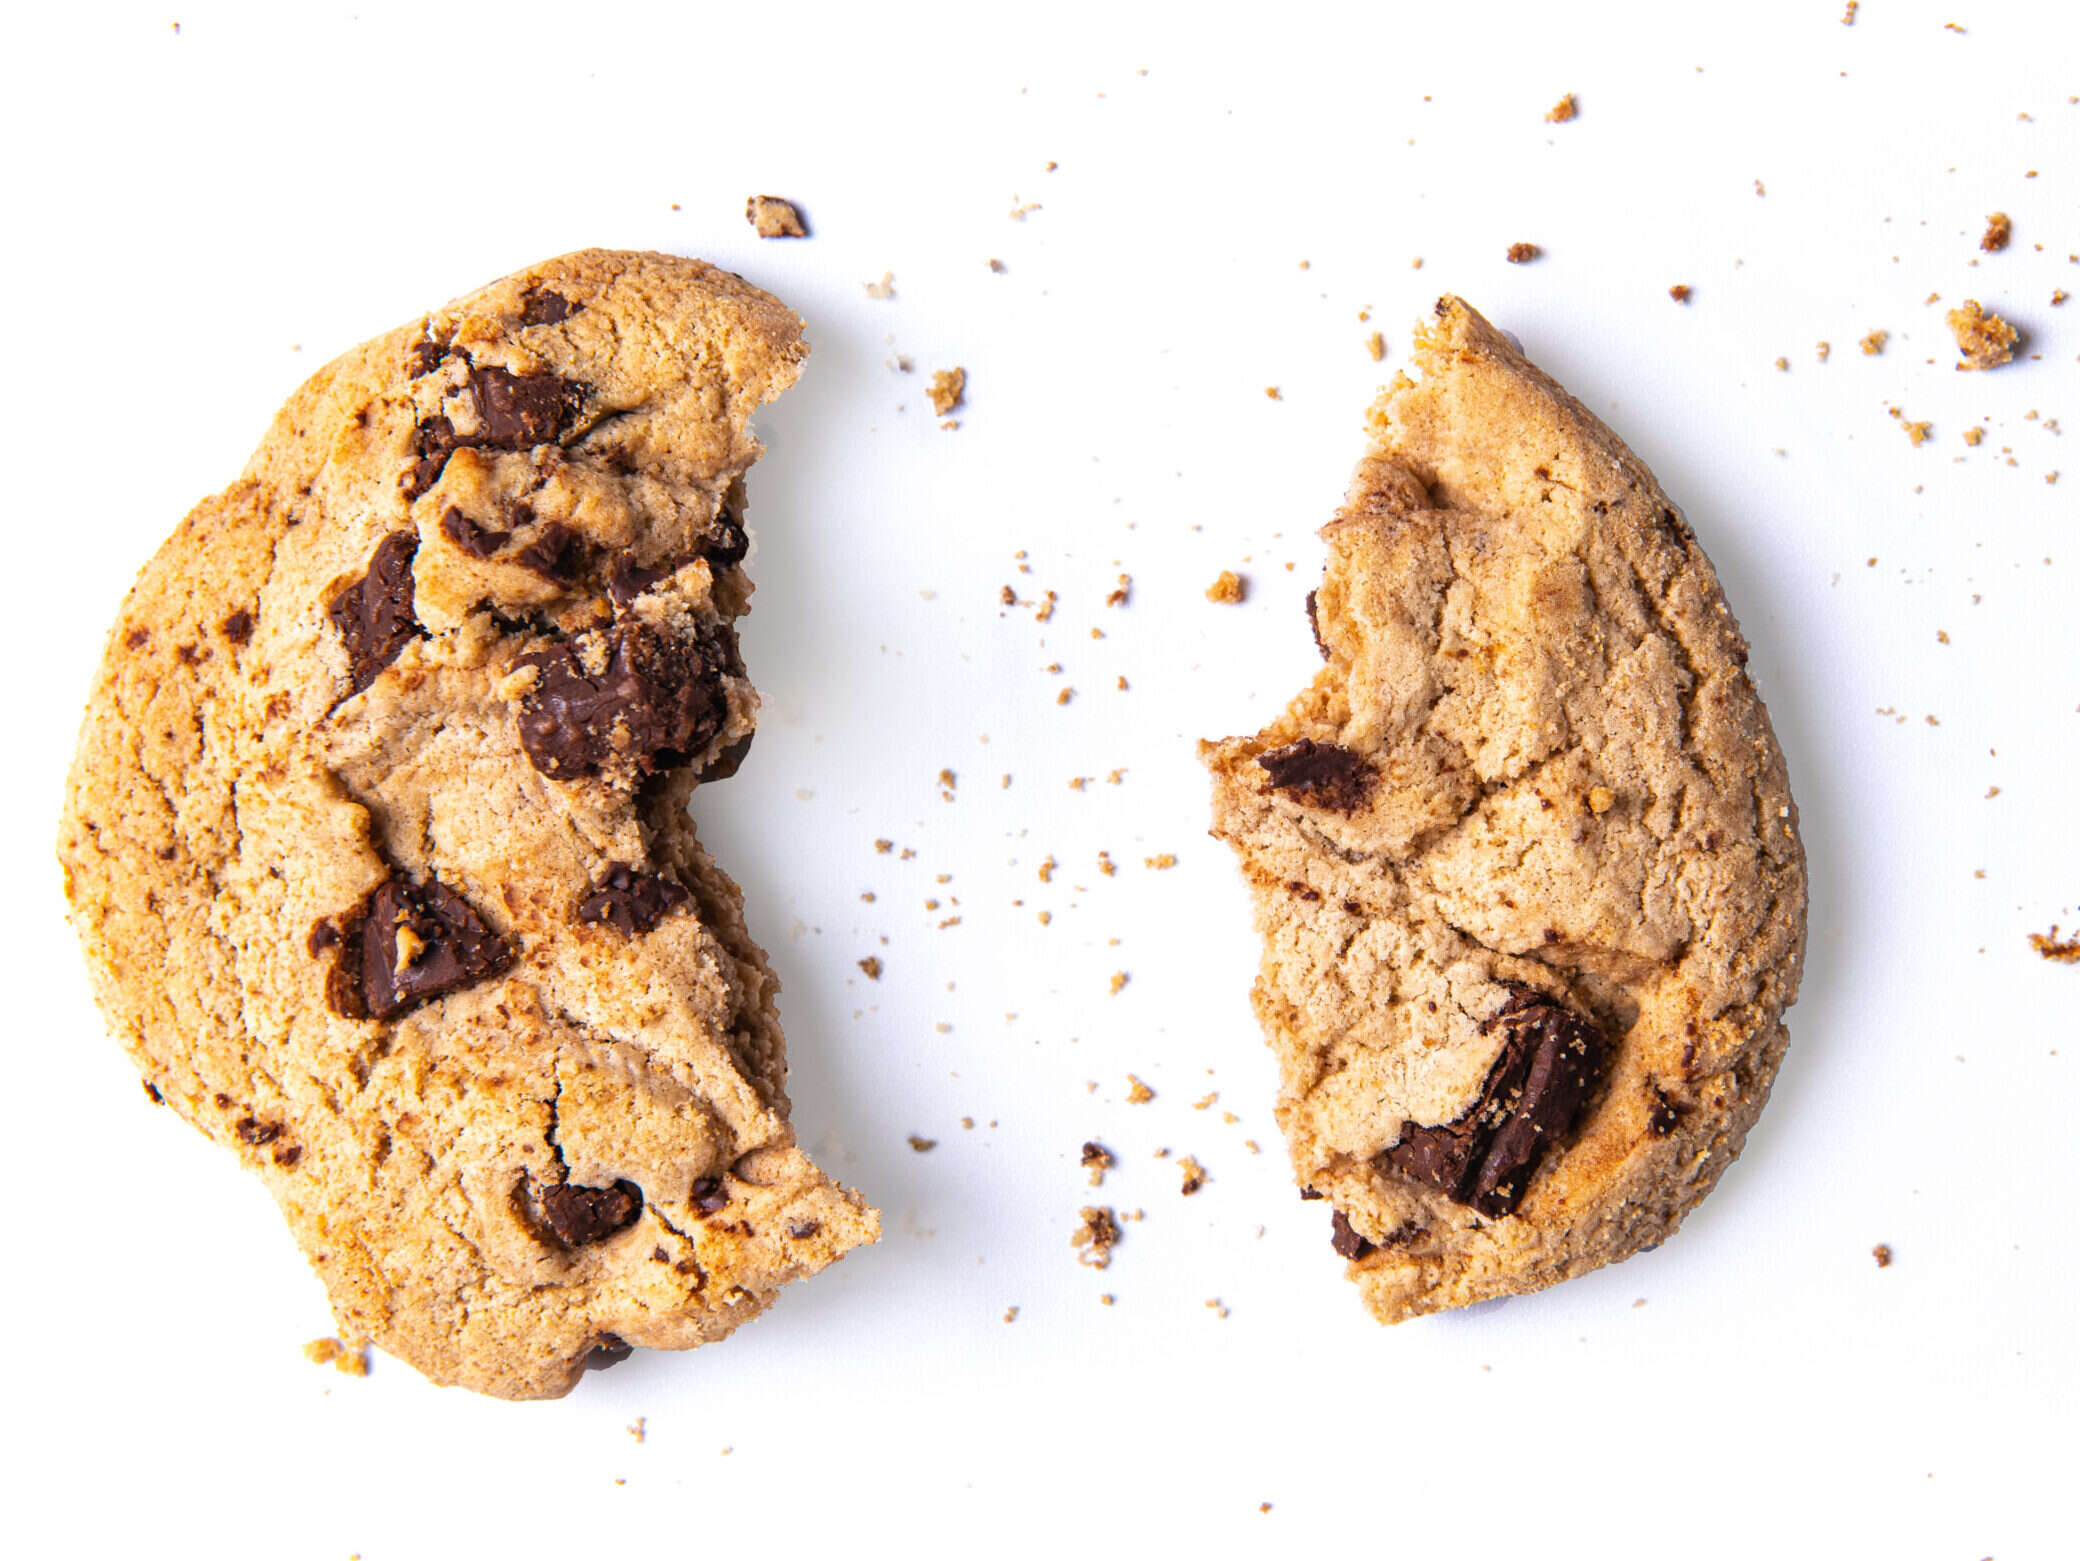 Publishers 'broadly optimistic' about life after cookies - but should they be?